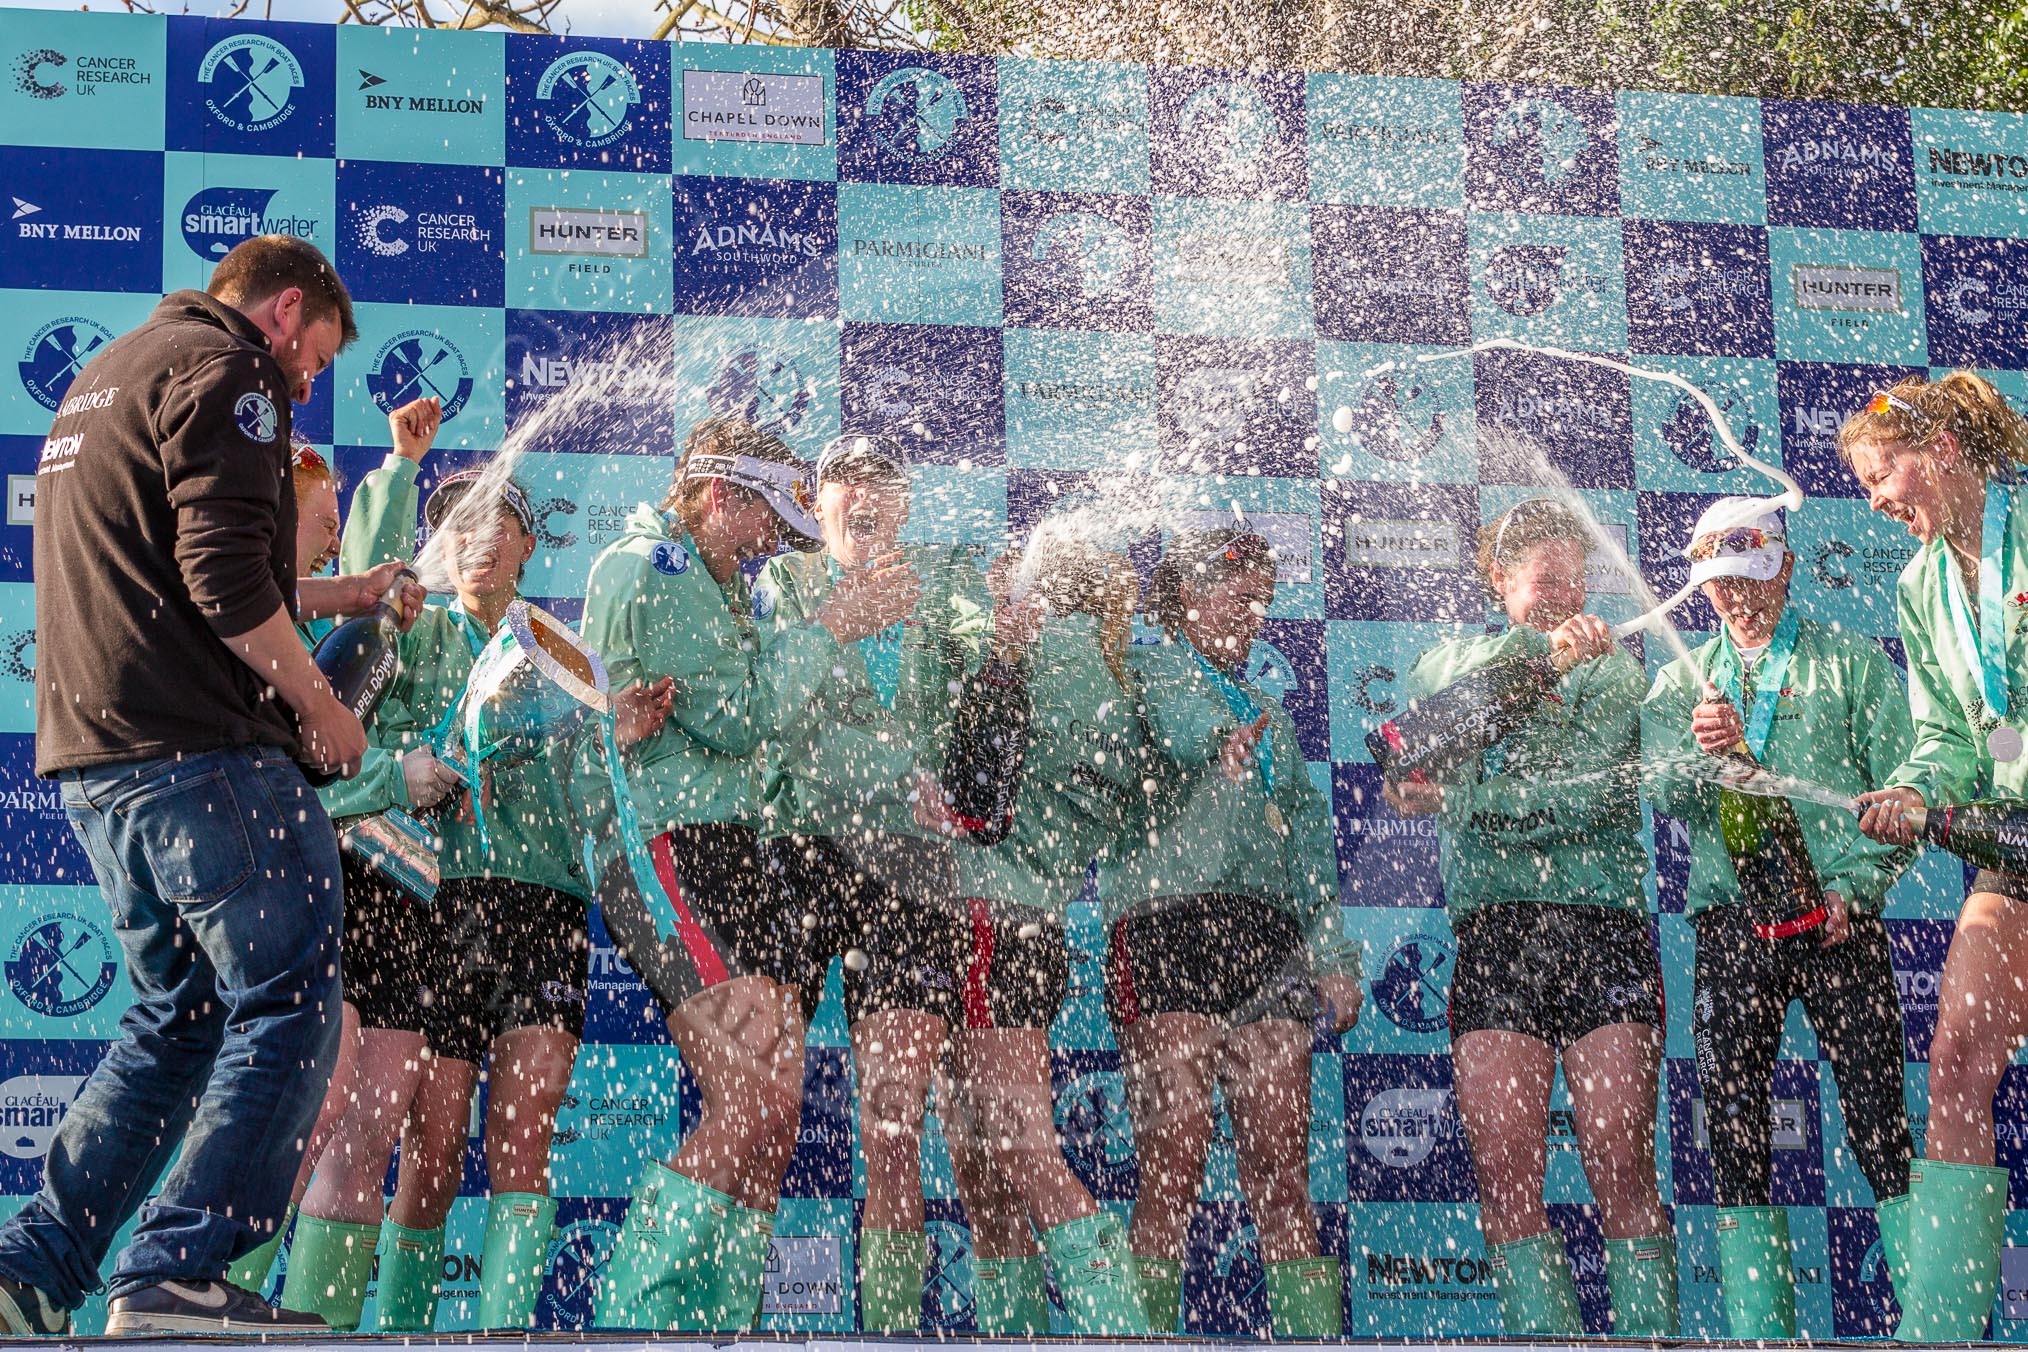 The Boat Race season 2017 -  The Cancer Research Women's Boat Race: CUWBC covered in spray (Cahmpagne, not Thames water) at the price giving.
River Thames between Putney Bridge and Mortlake,
London SW15,

United Kingdom,
on 02 April 2017 at 17:13, image #257